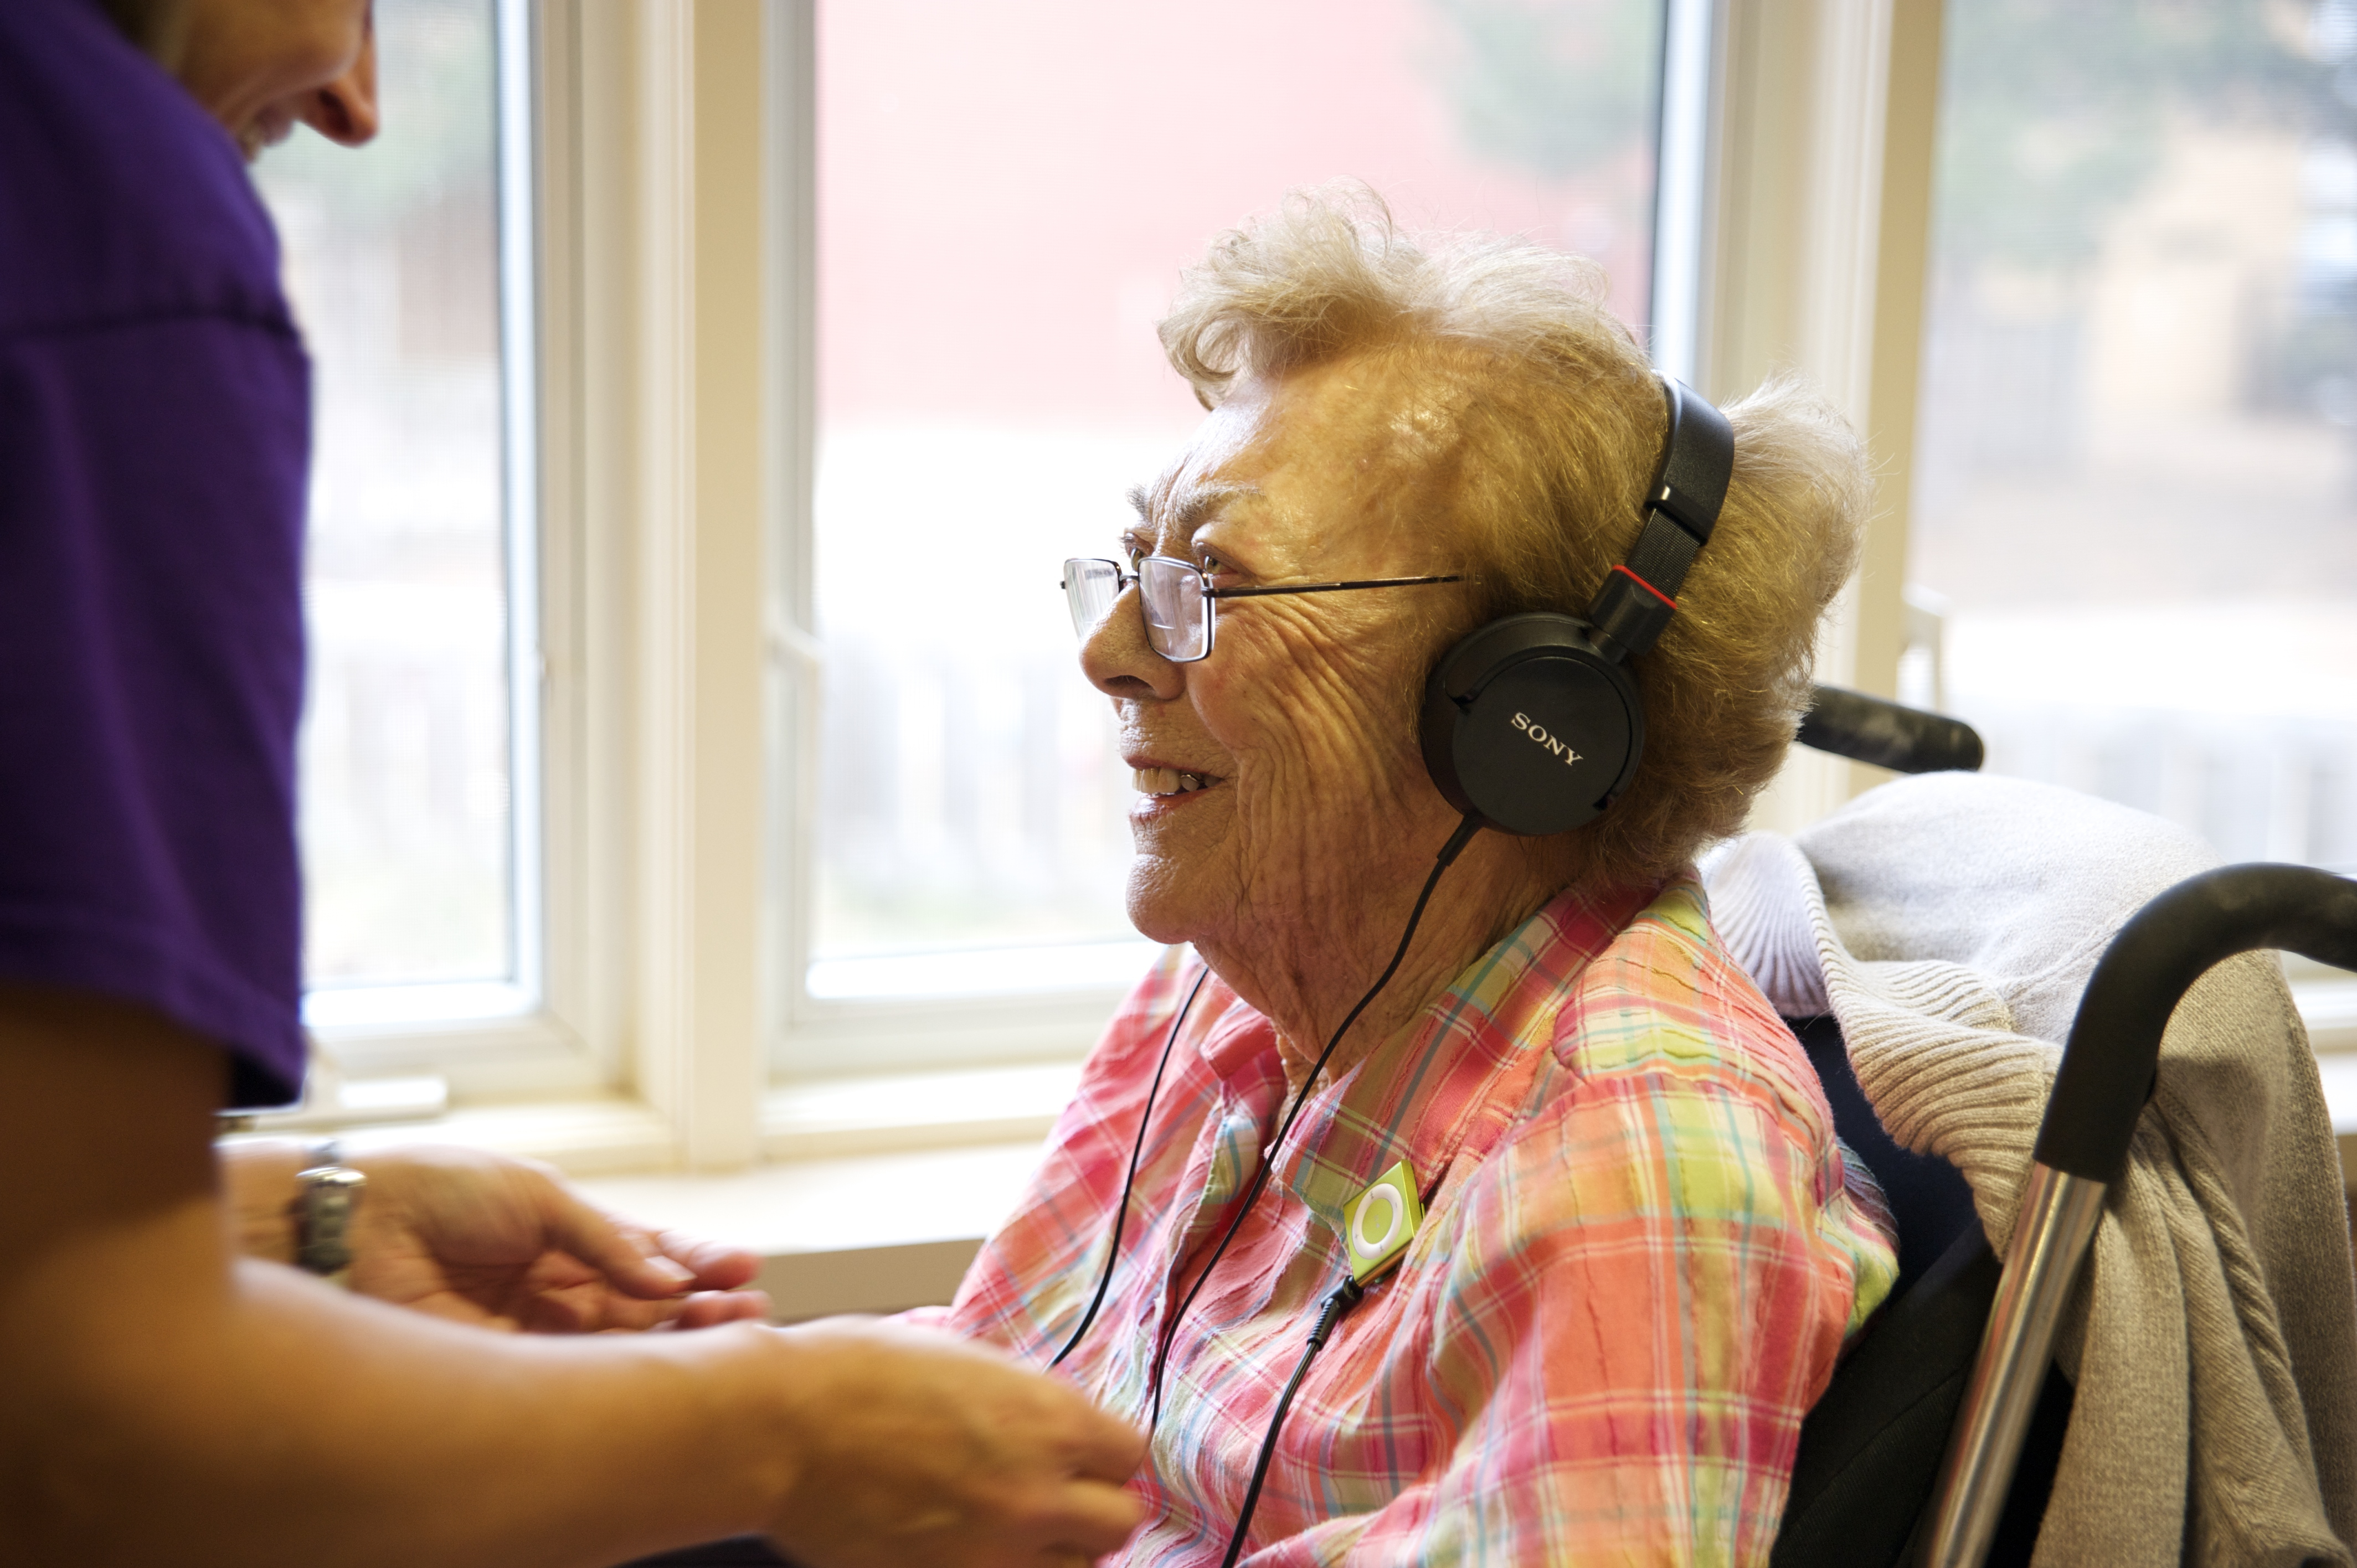 Music & Memory provides a personalized playlist for seniors living with dementia